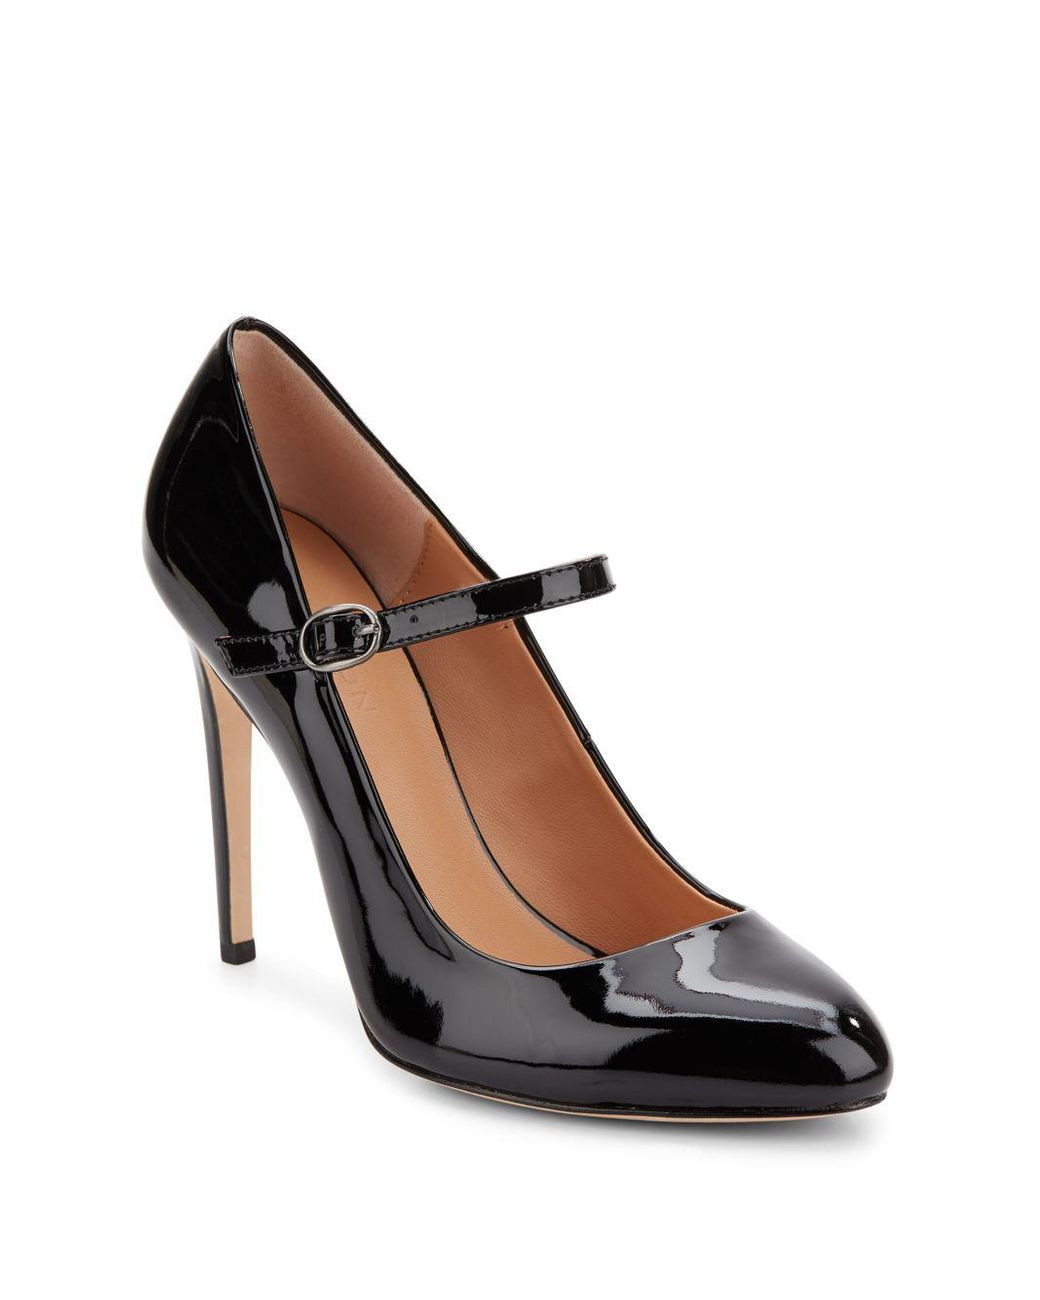 Halston Patent Leather Mary Jane Pumps in Black | Lyst